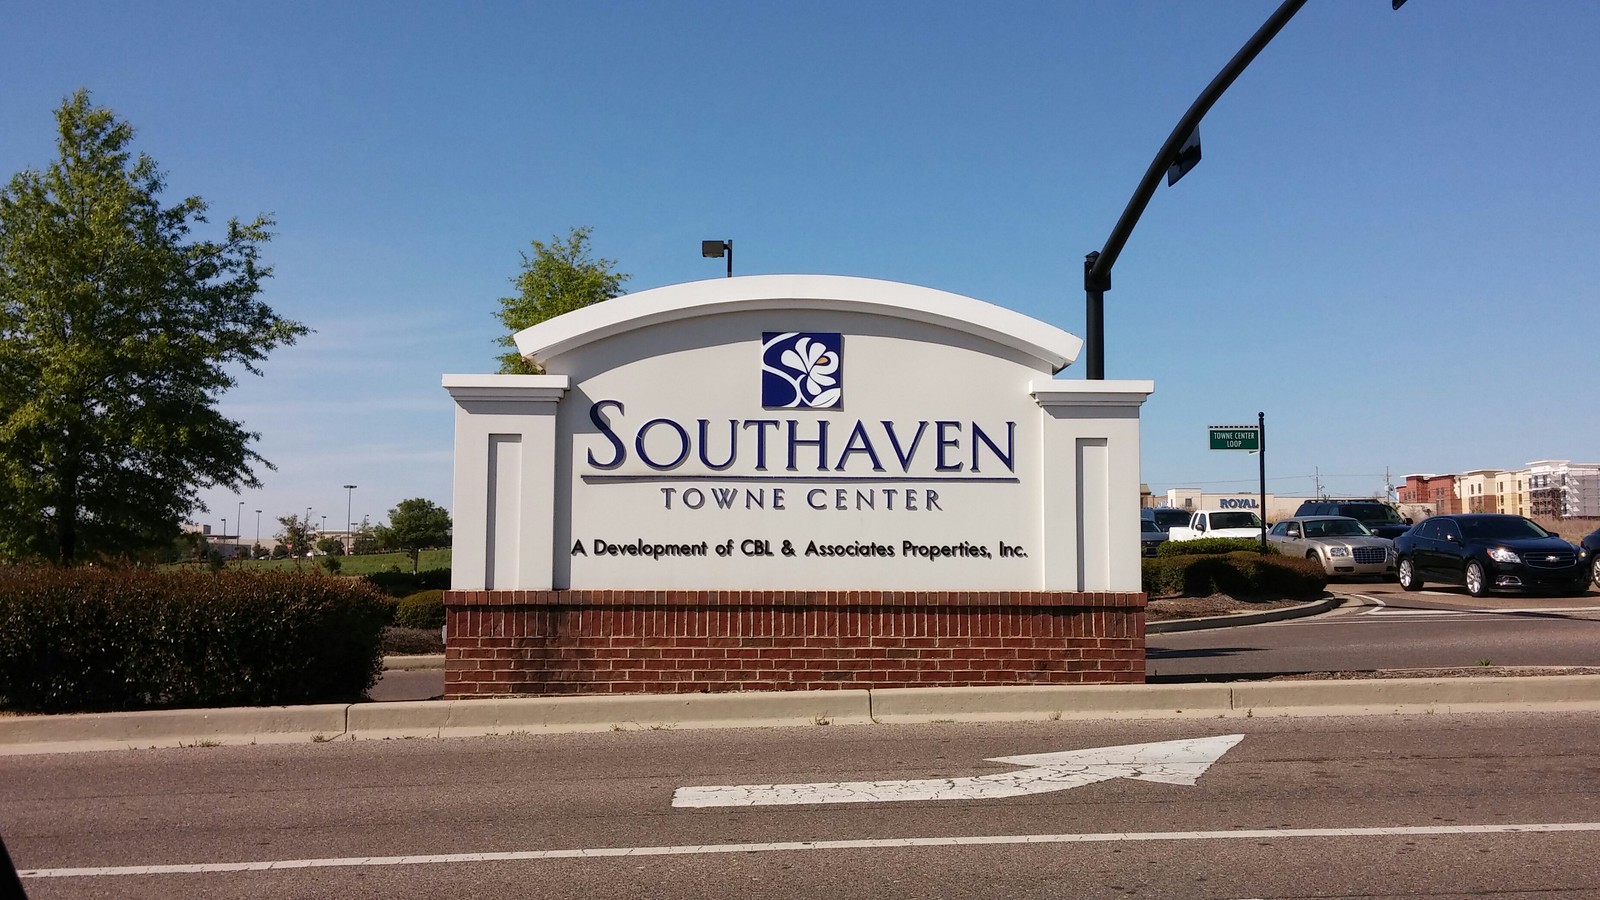 Southaven Towne Center Southaven Ms Flickr